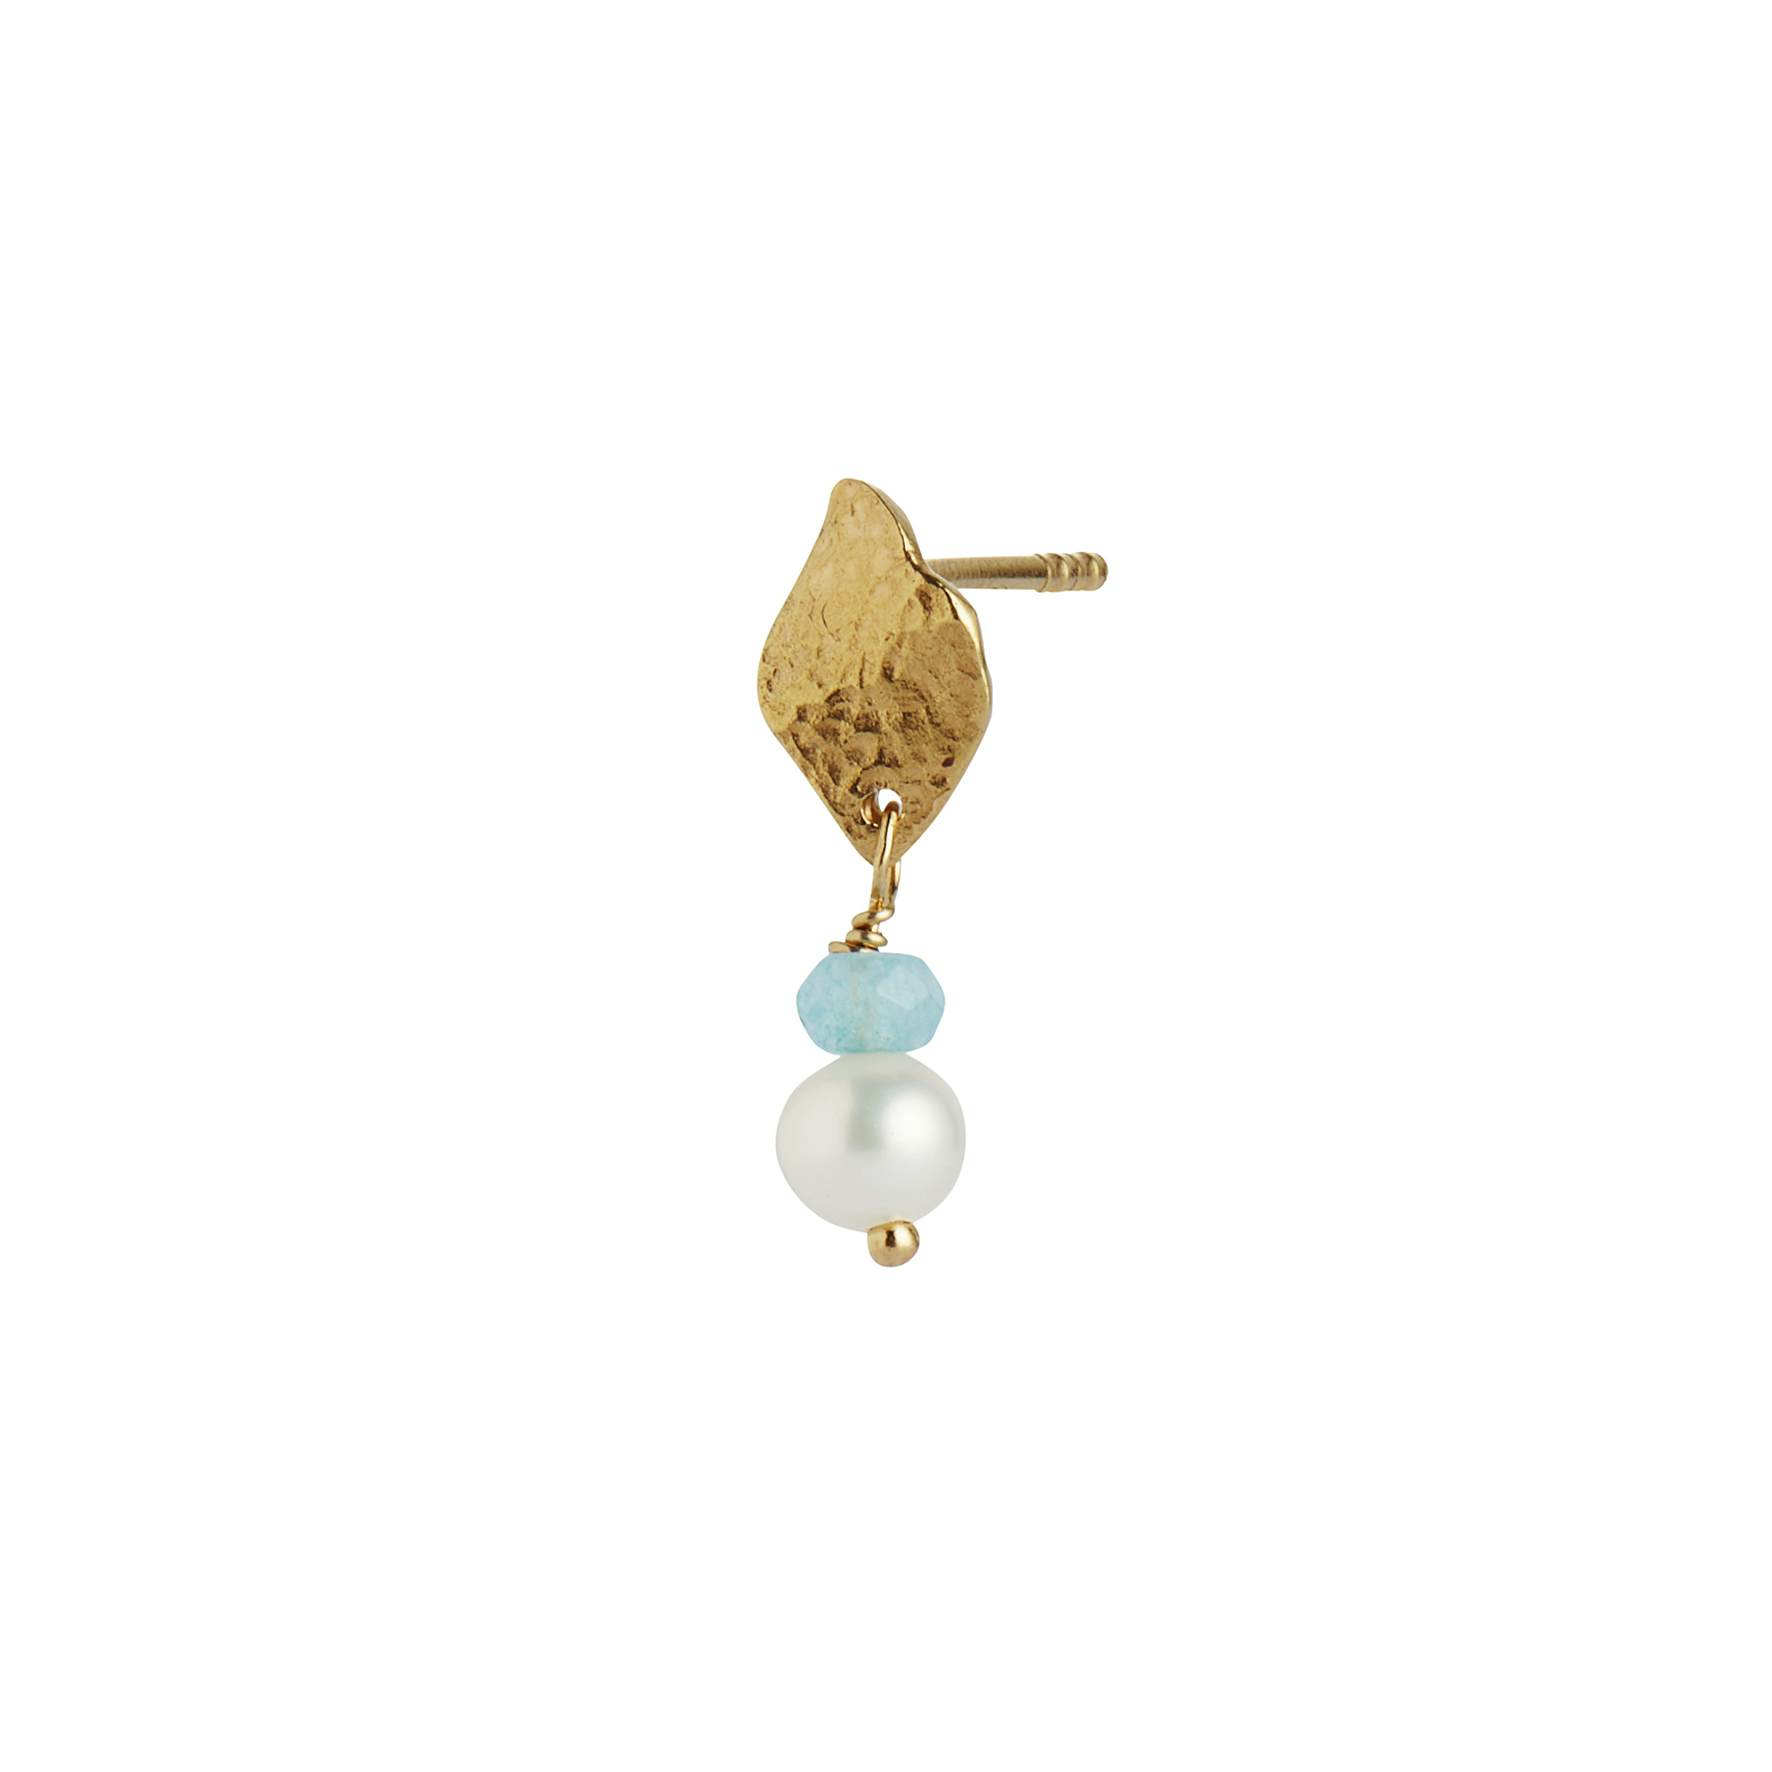 Ile De L'Amour with Pearl and Light Blue Topaz Earring från STINE A Jewelry i Förgyllt-Silver Sterling 925